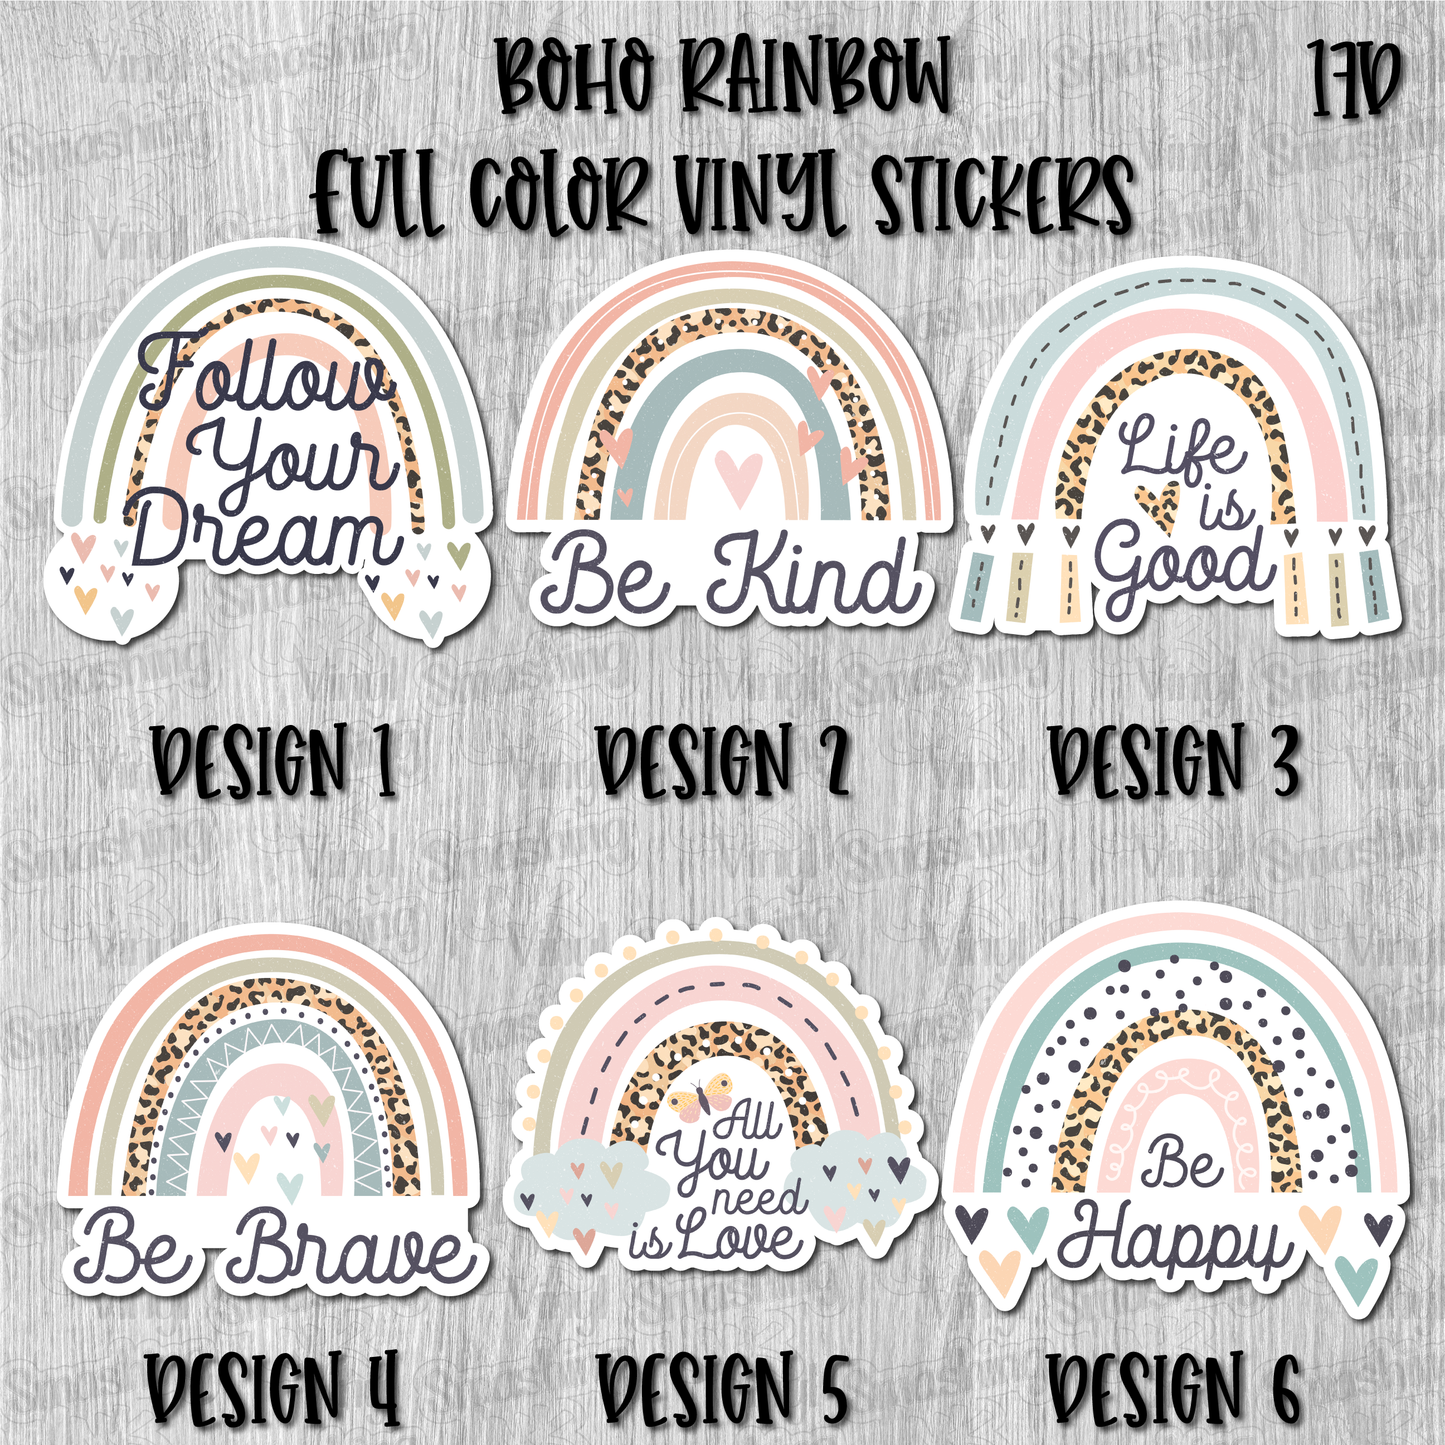 Boho Rainbow - Full Color Vinyl Stickers (SHIPS IN 3-7 BUS DAYS)